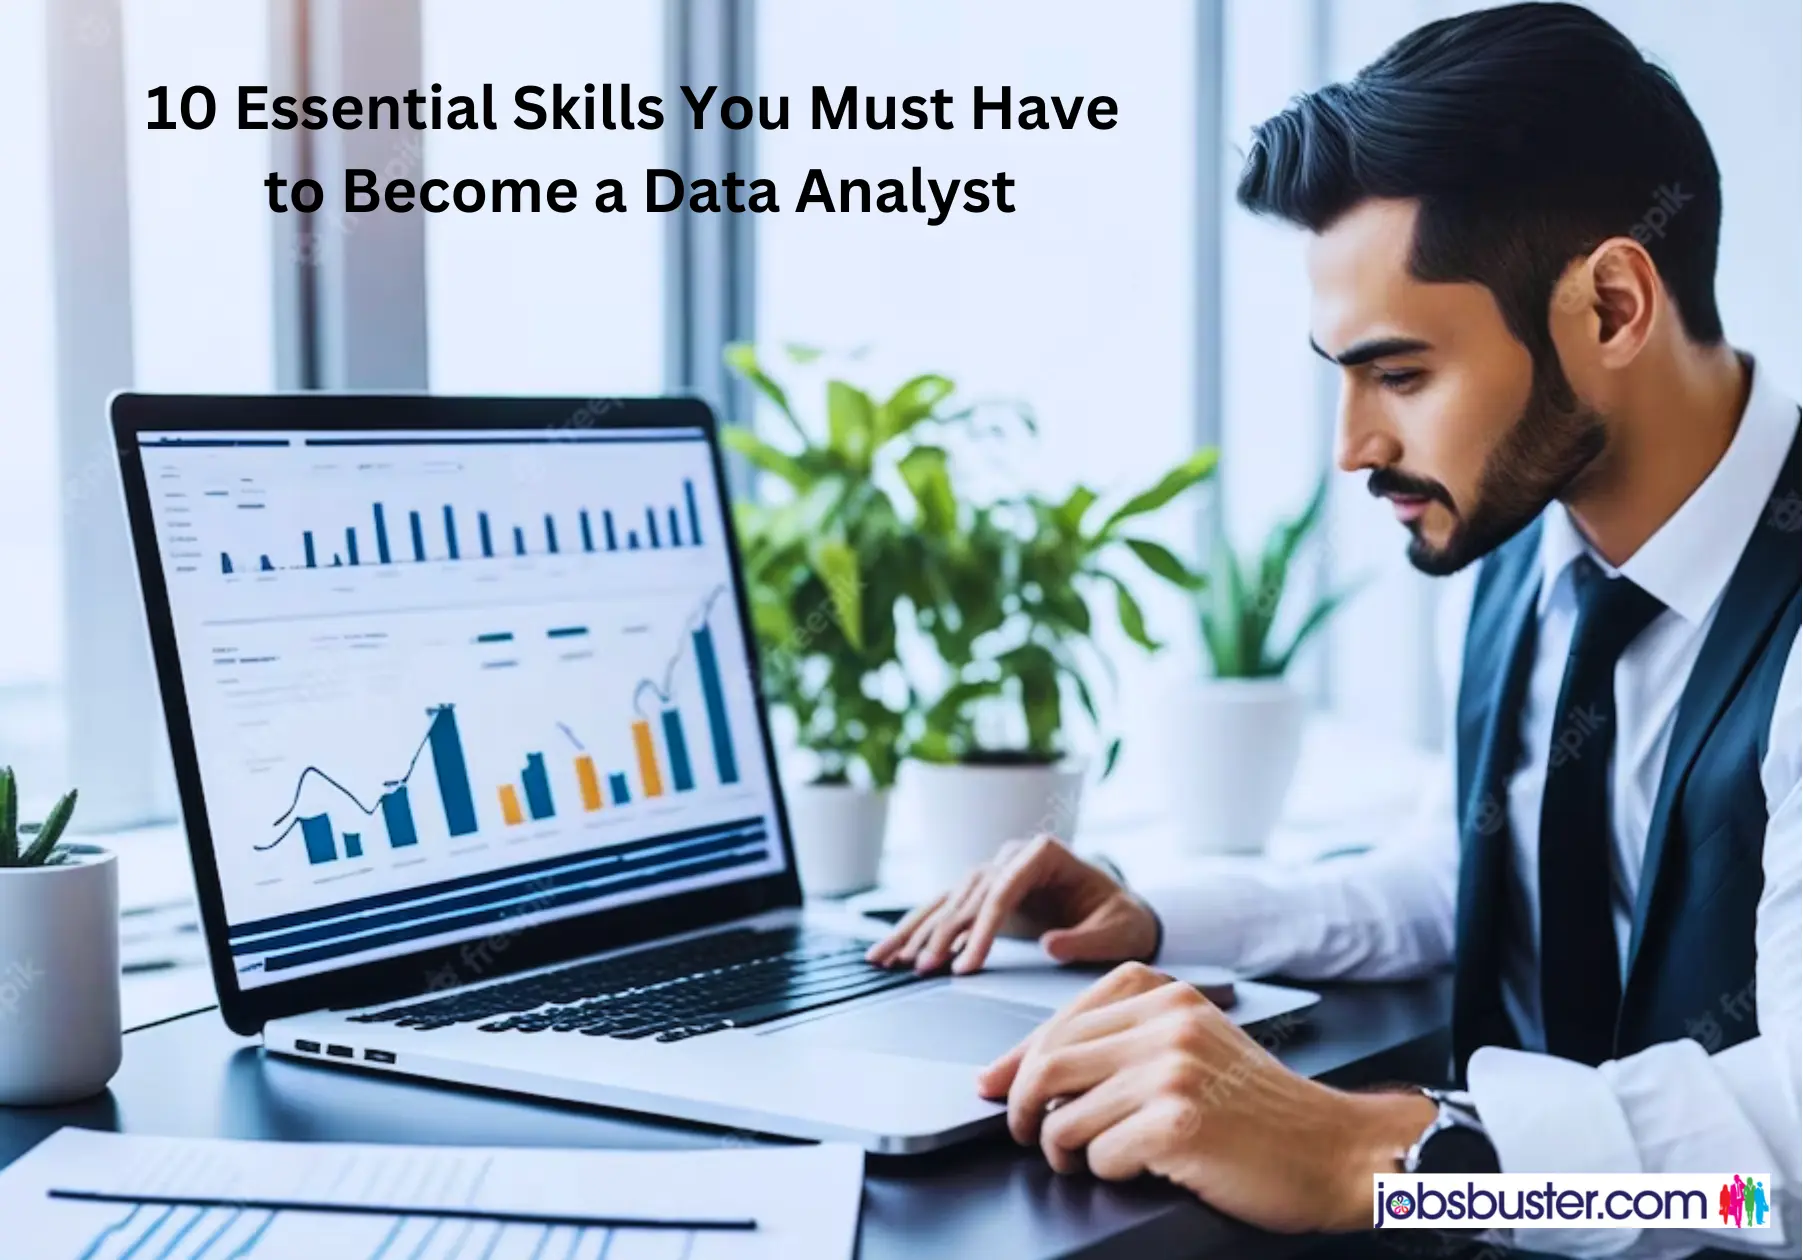 10 Essential Skills You Must Have to Become a Data Analyst